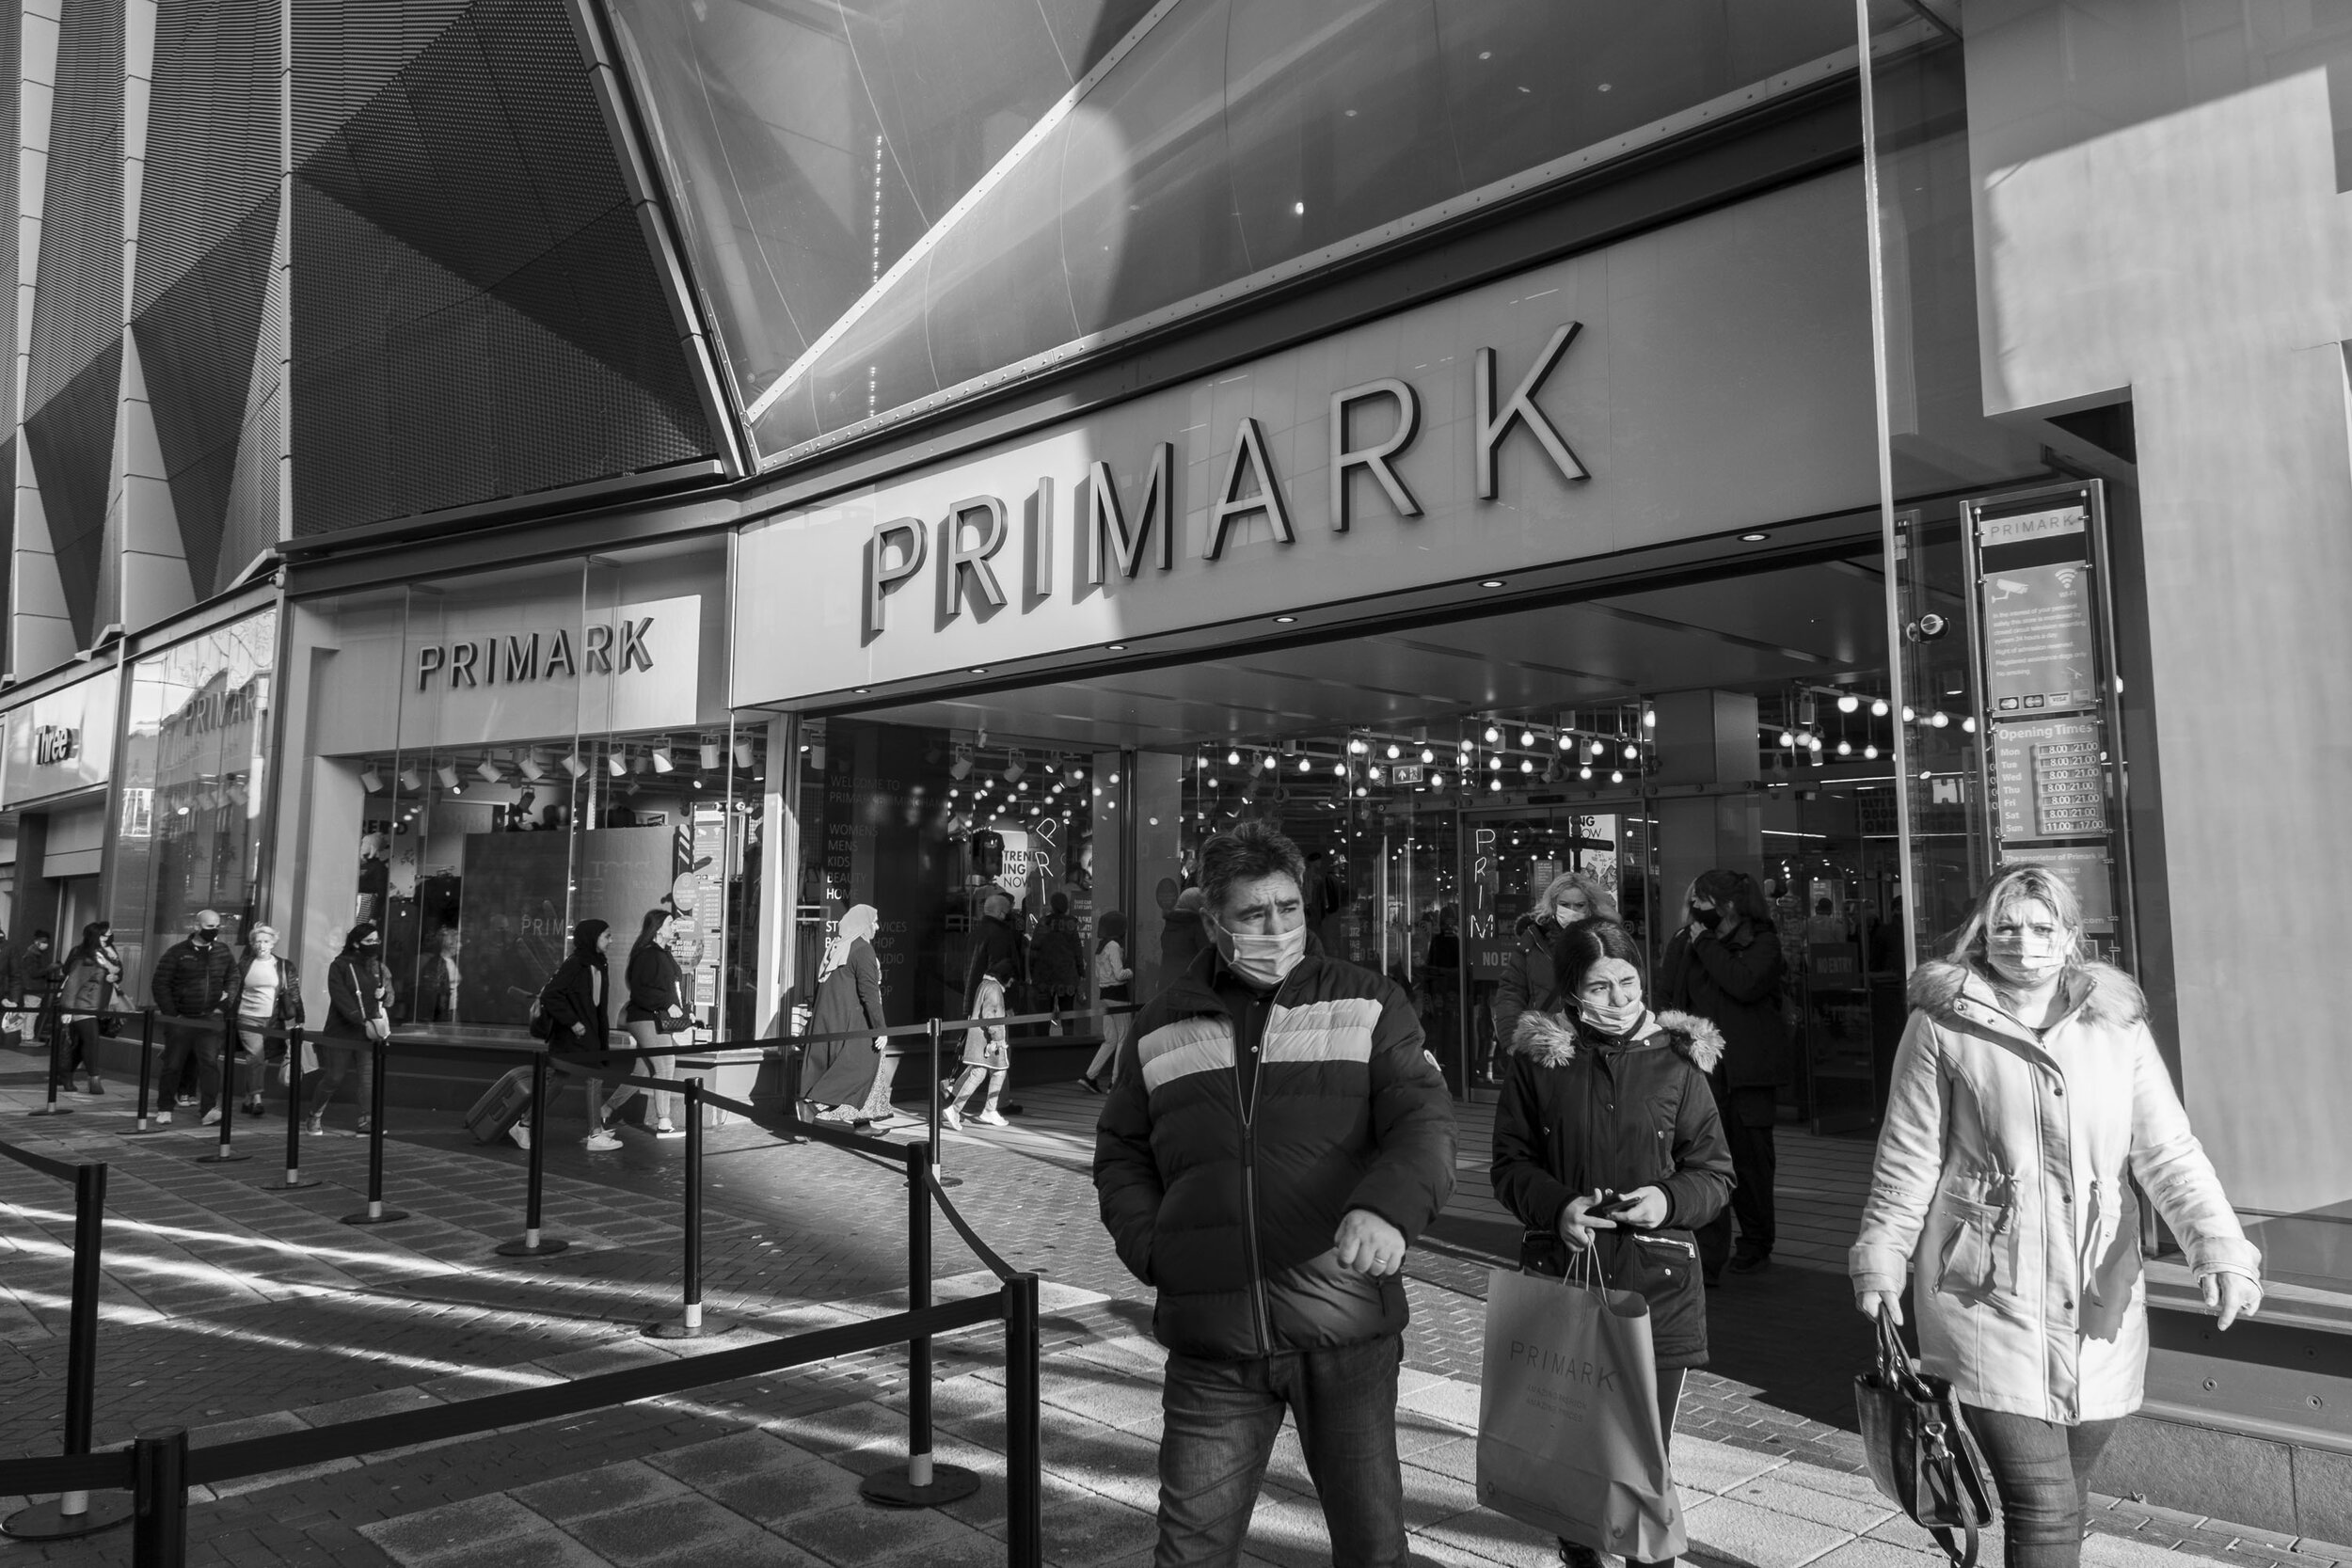  Primark flagship store enjoys busy times as it re-opens as Birmingham is placed into tier two. October 2020. City Centre. 